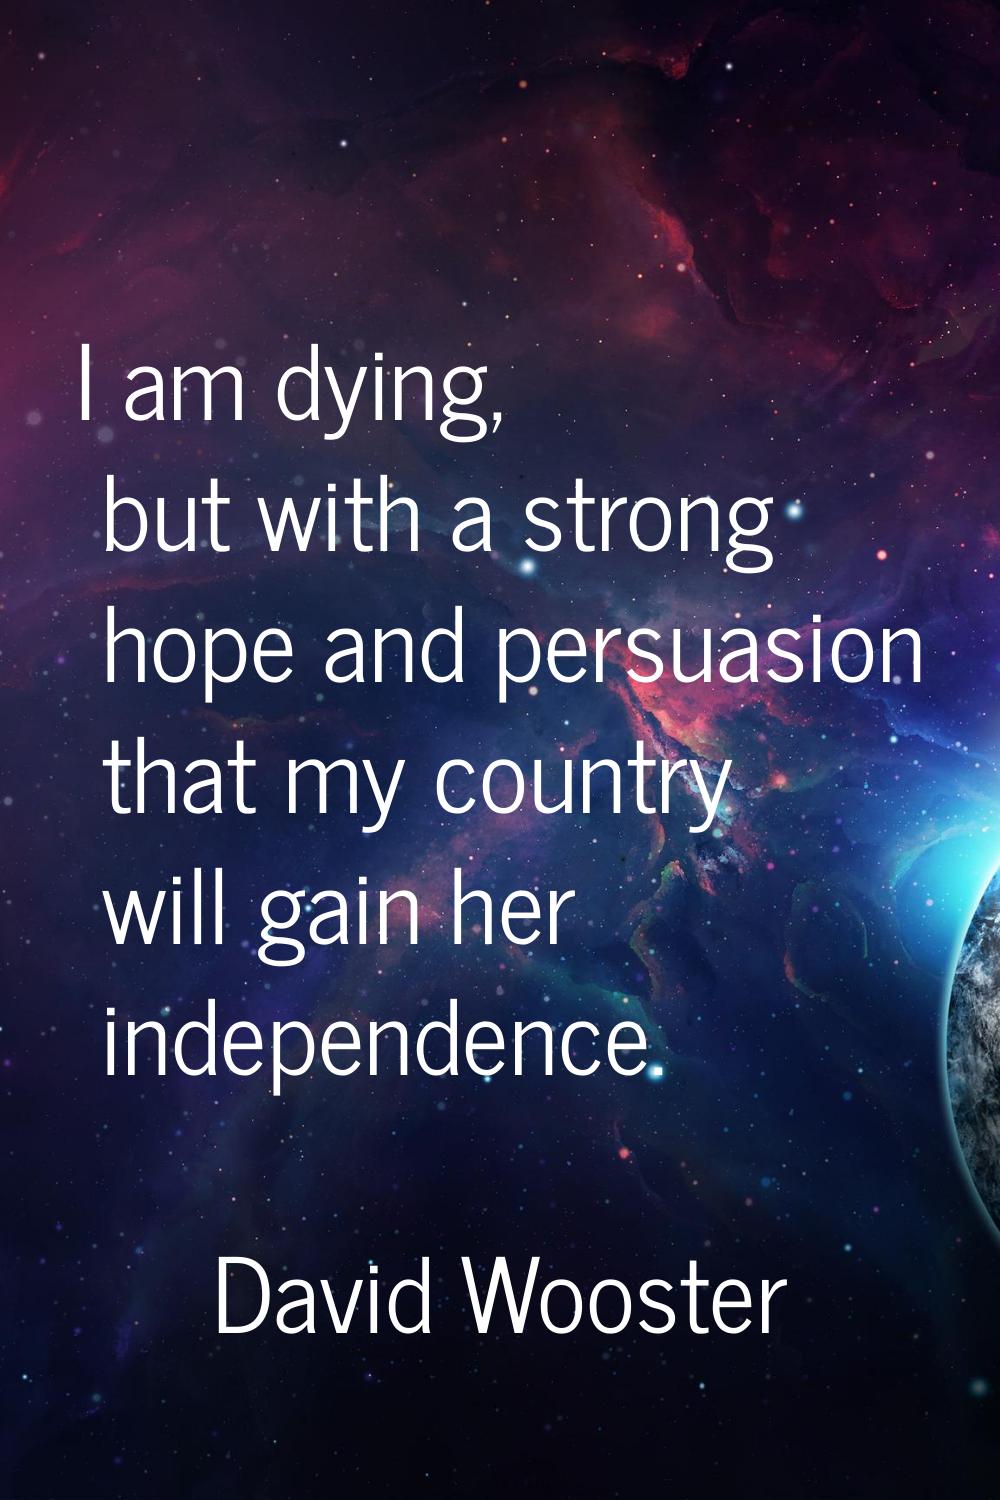 I am dying, but with a strong hope and persuasion that my country will gain her independence.